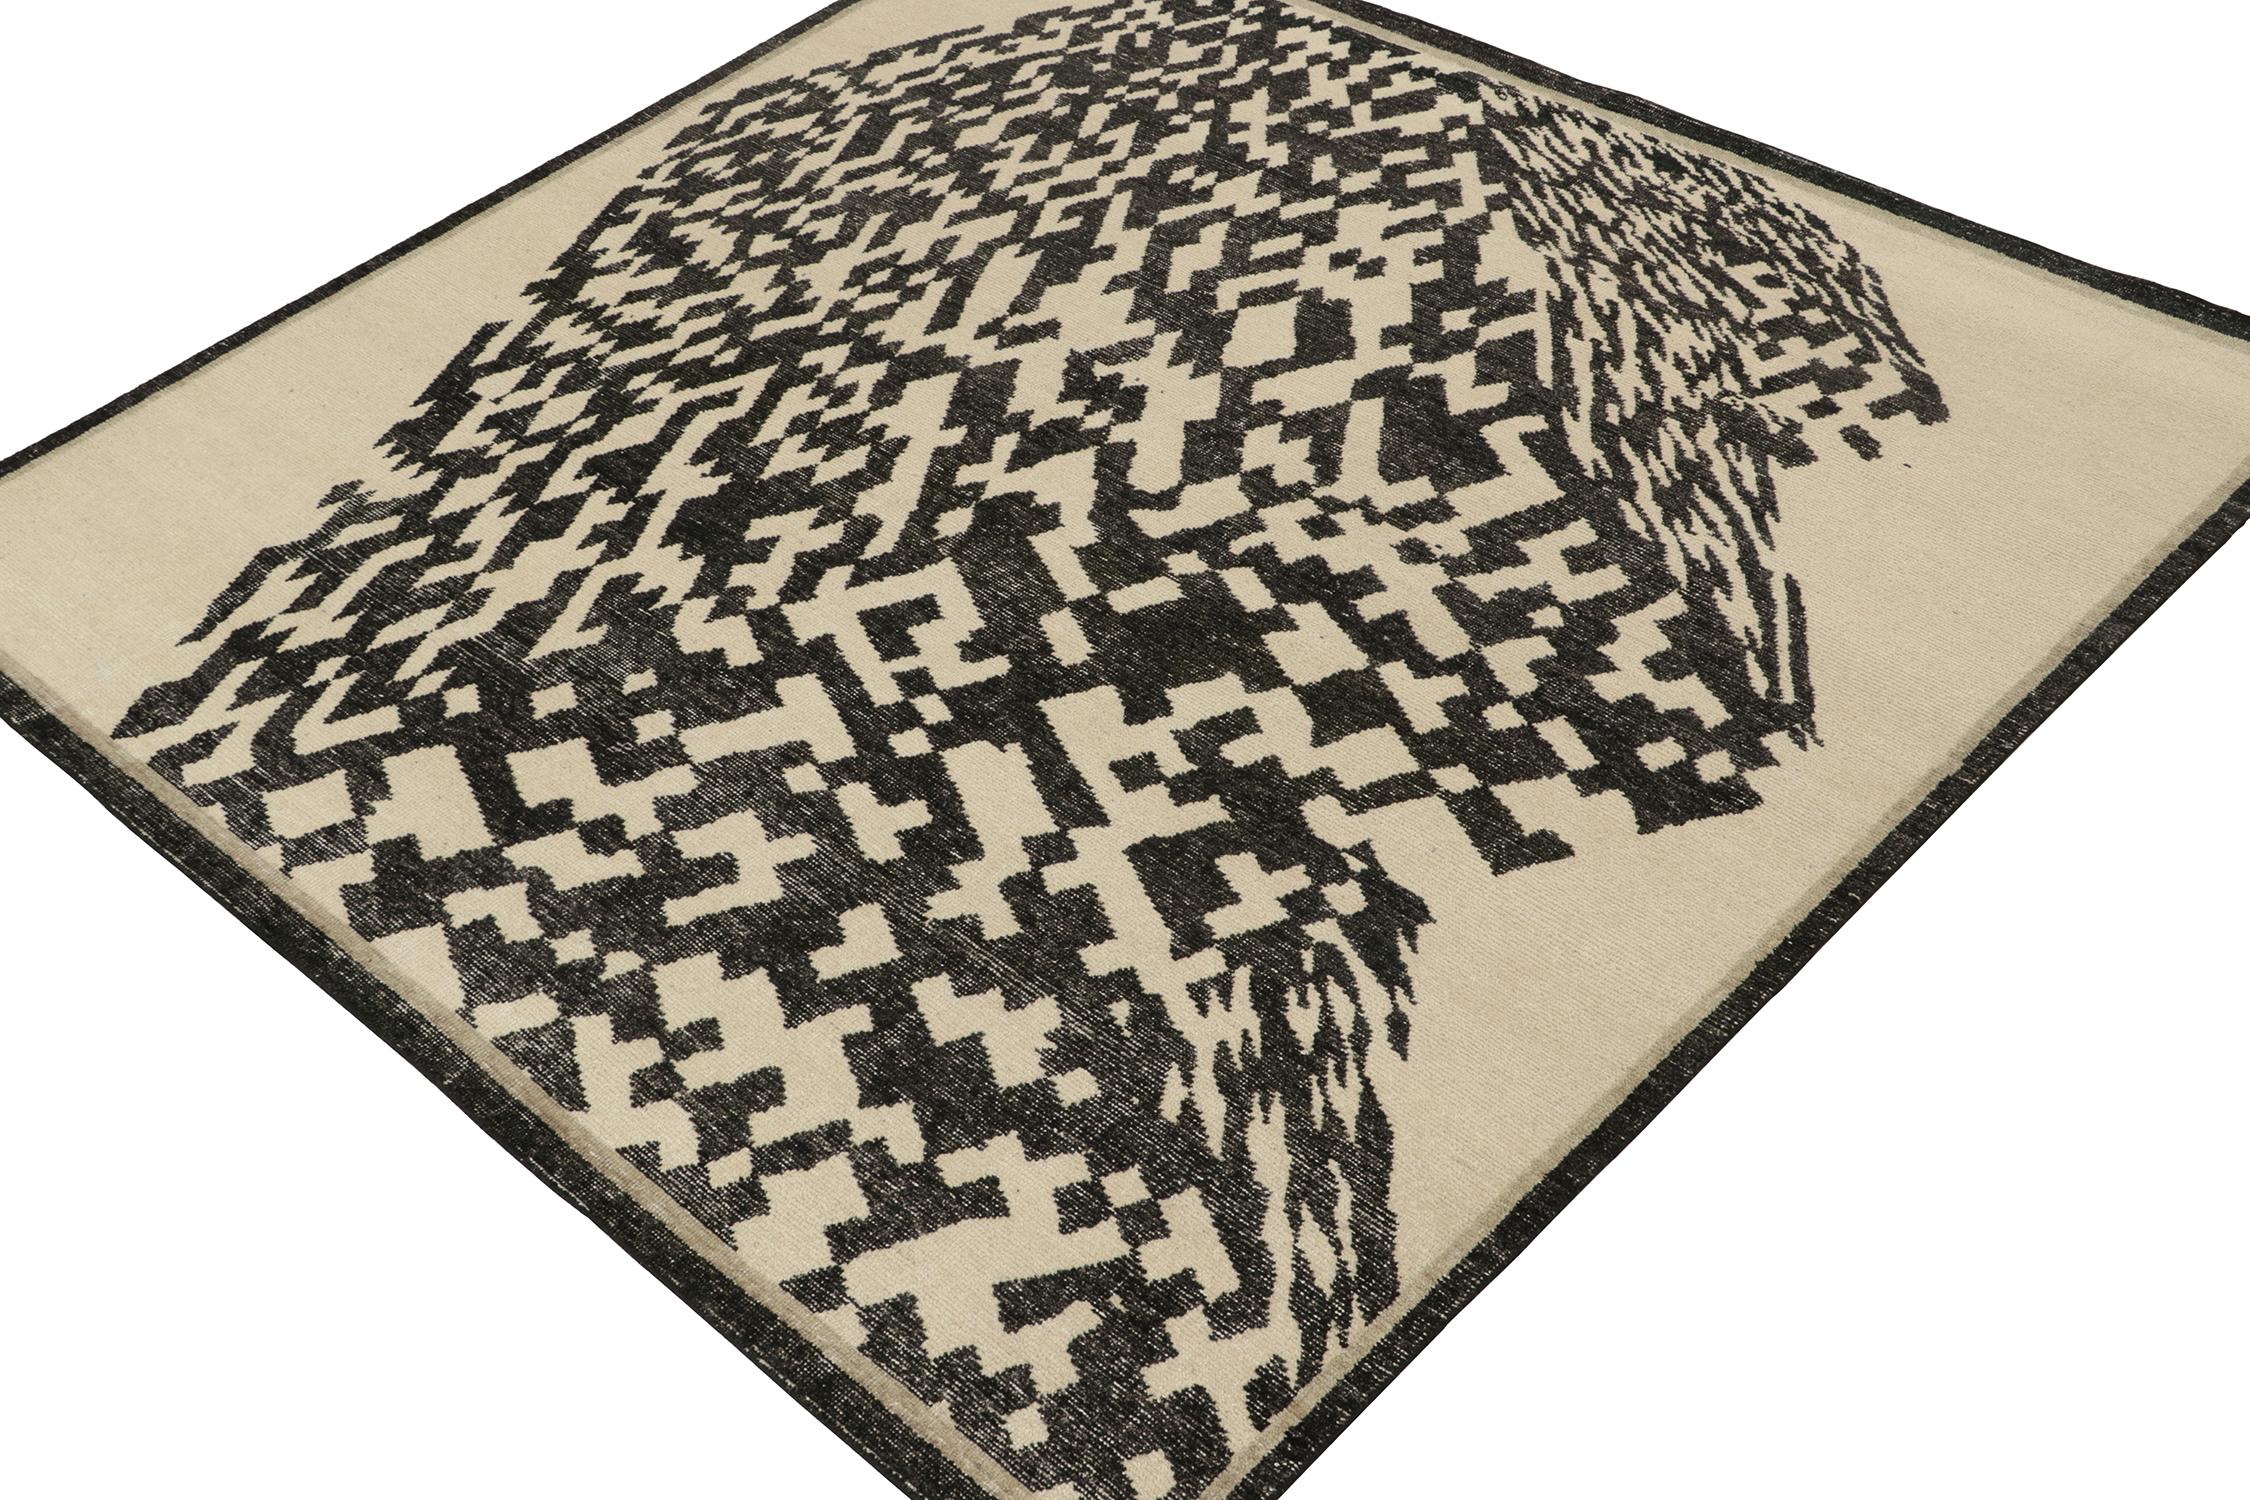 This modern 8x8 square rug is a bold new addition to the Homage Collection by Rug & Kilim. Hand-knotted in wool and cotton, its design marries abstract geometric patterns in a positive-negative play of white and black.

Further on the Design:

One